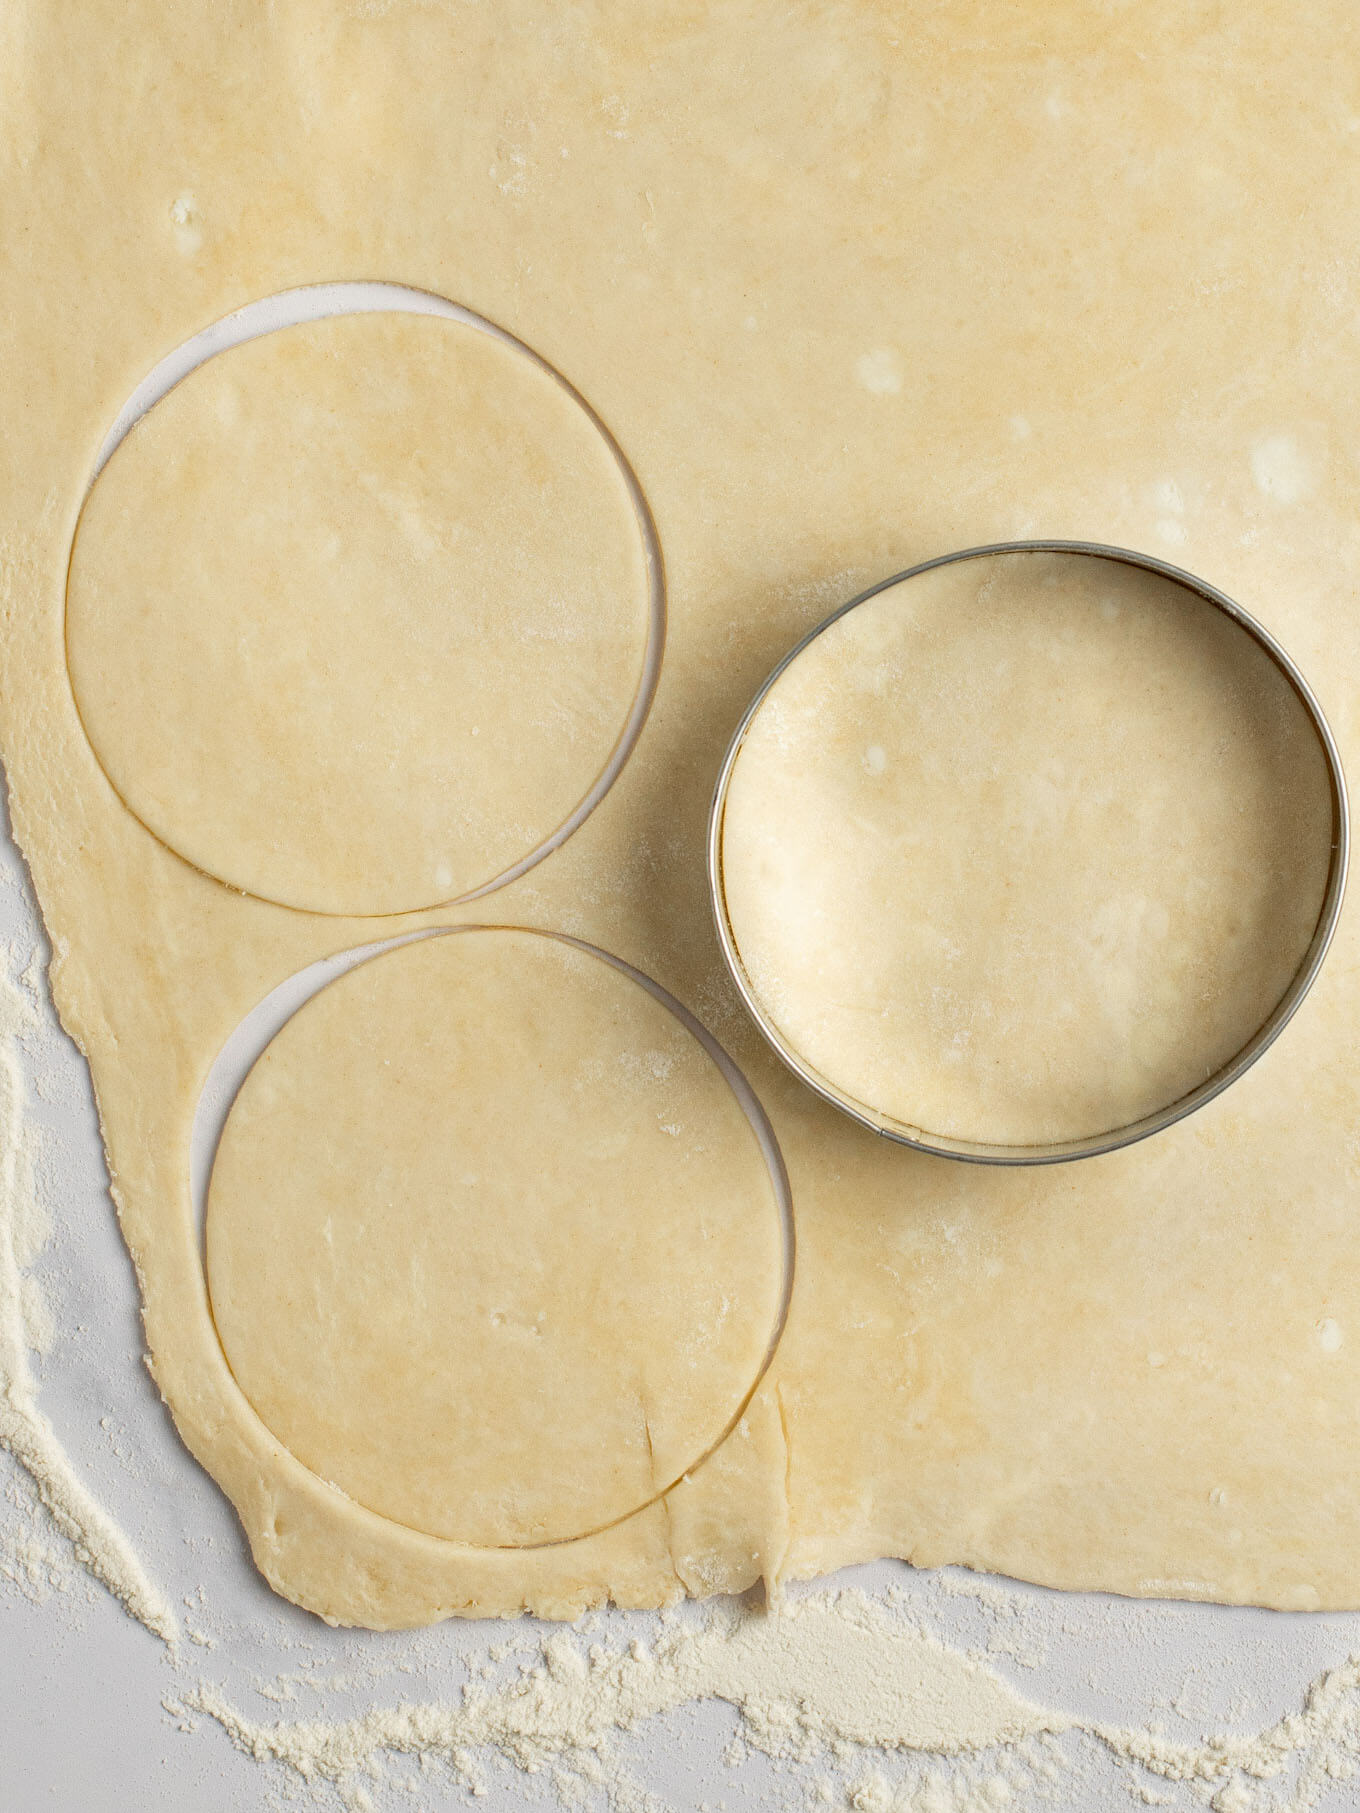 An overhead view of pie crust being cut into 3.5-inch circles.